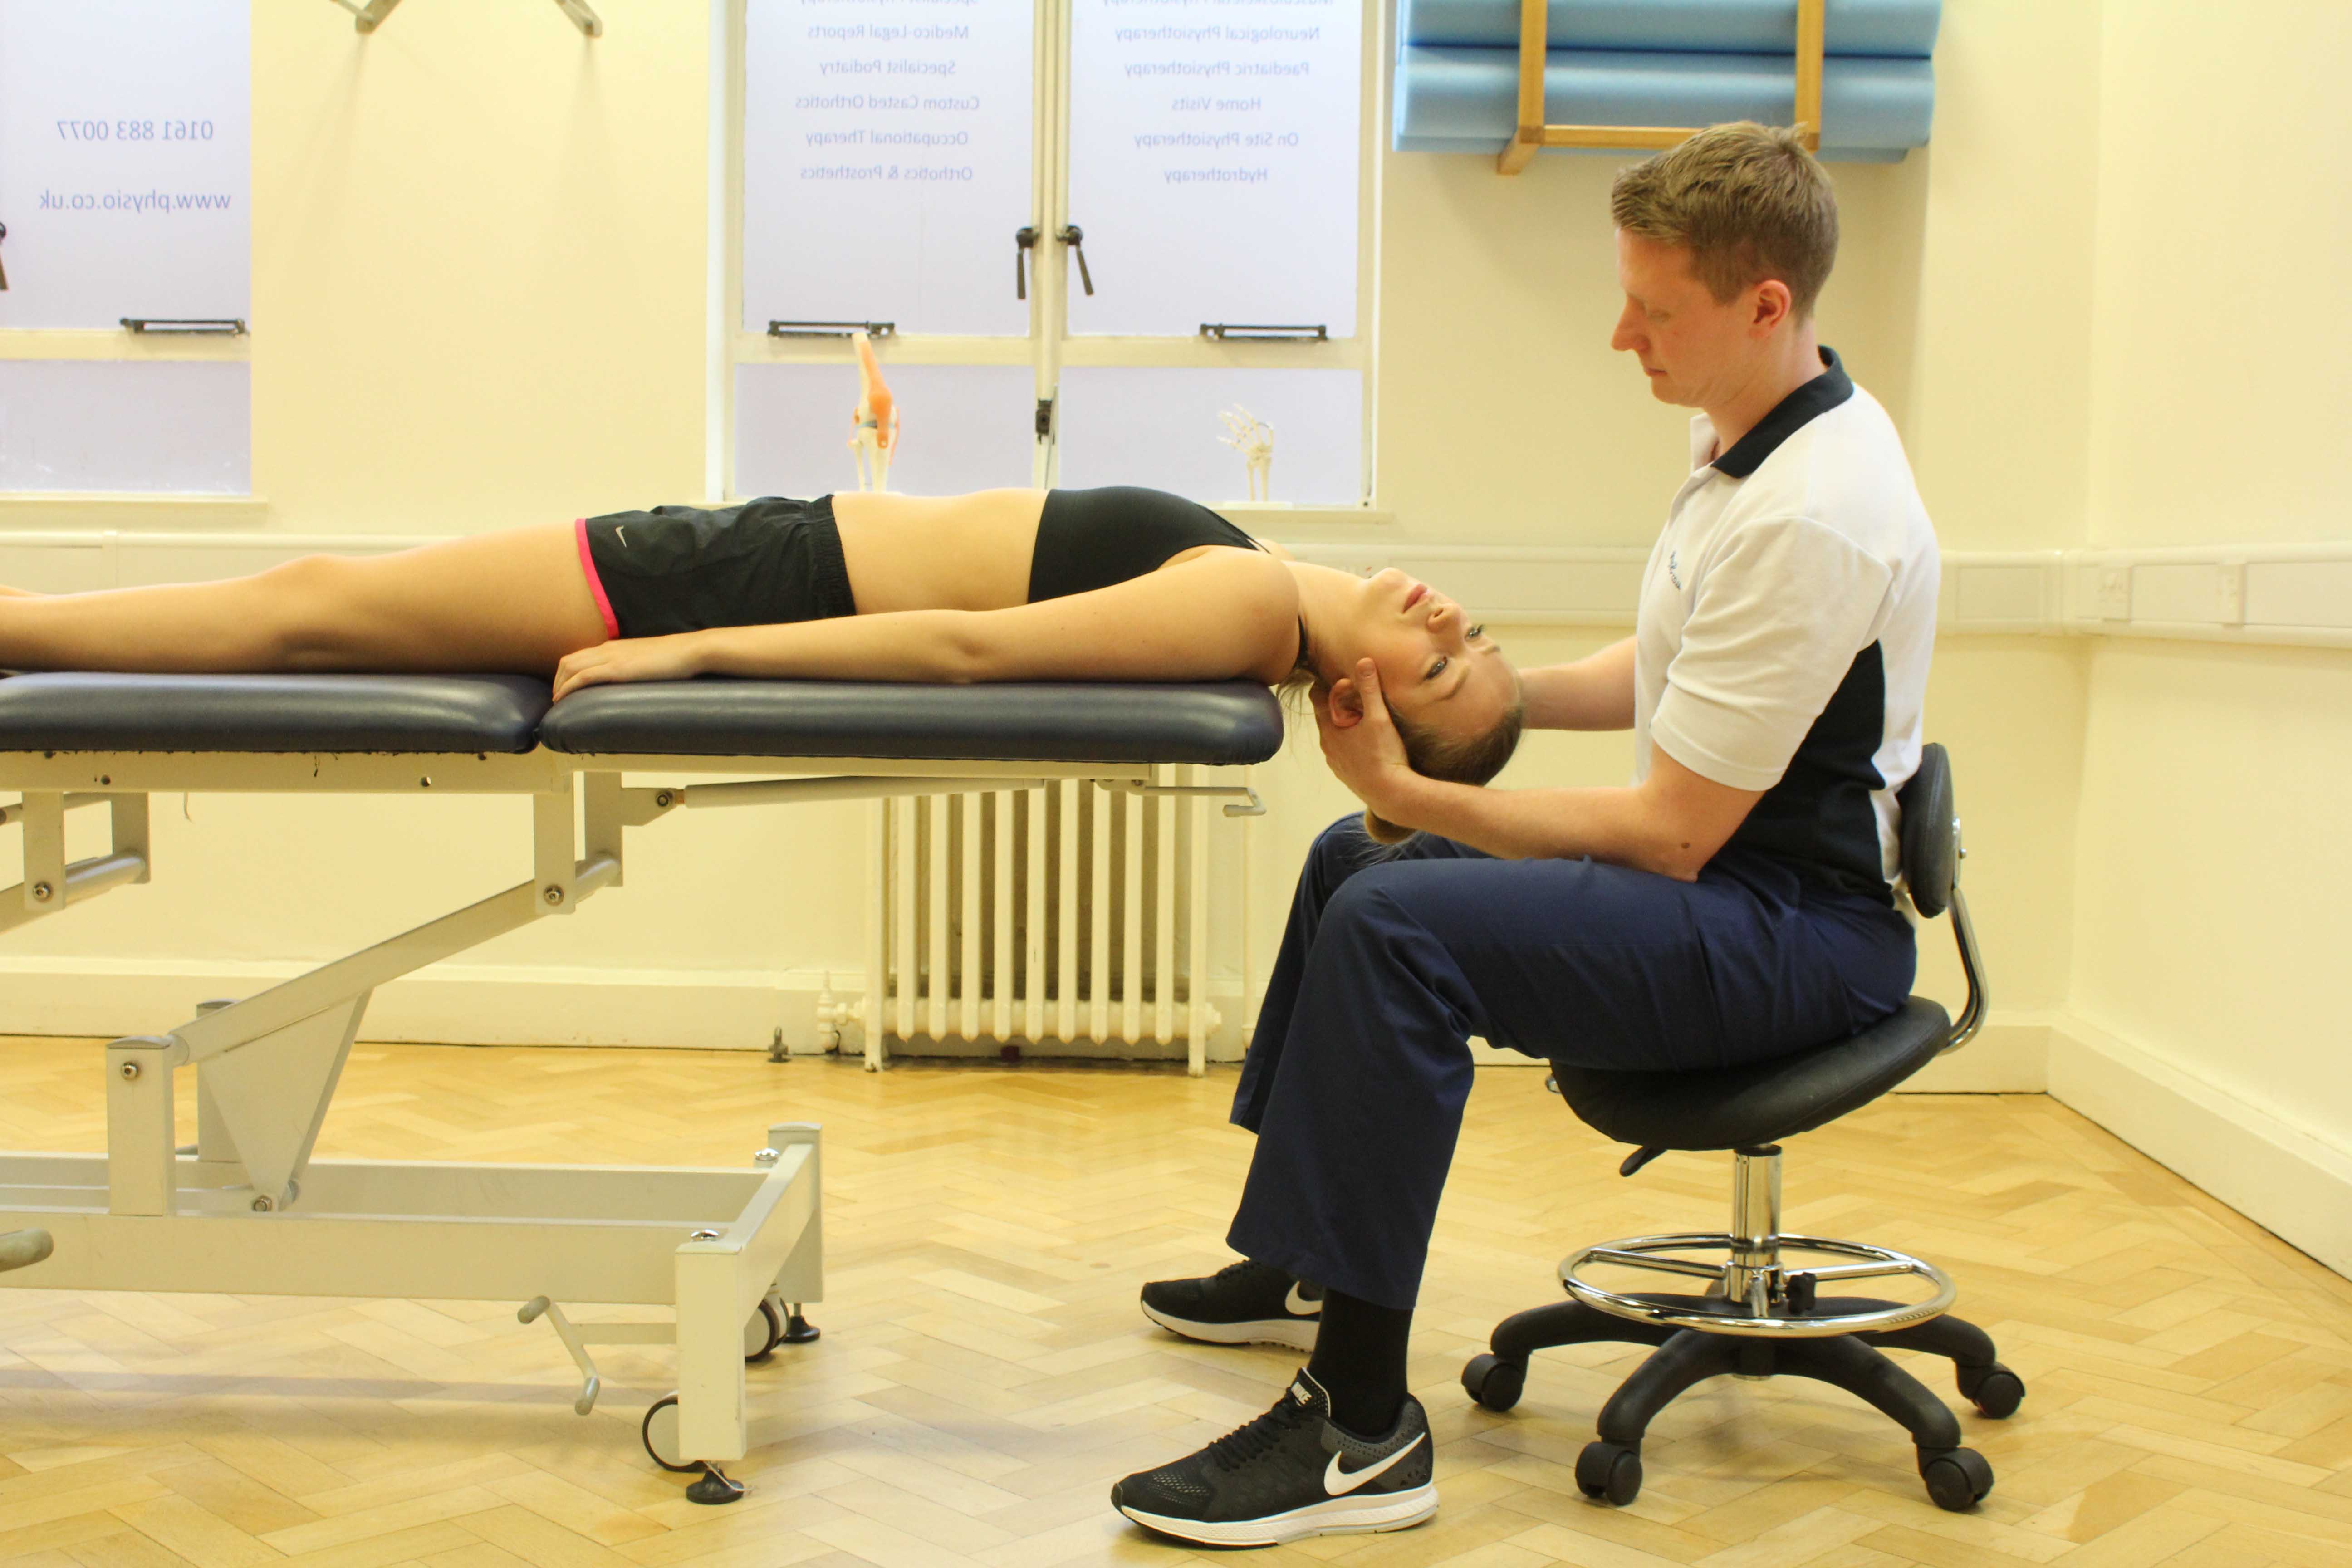 Vetsibular rehabilitation exercises carried out by a specialist physiotherapist